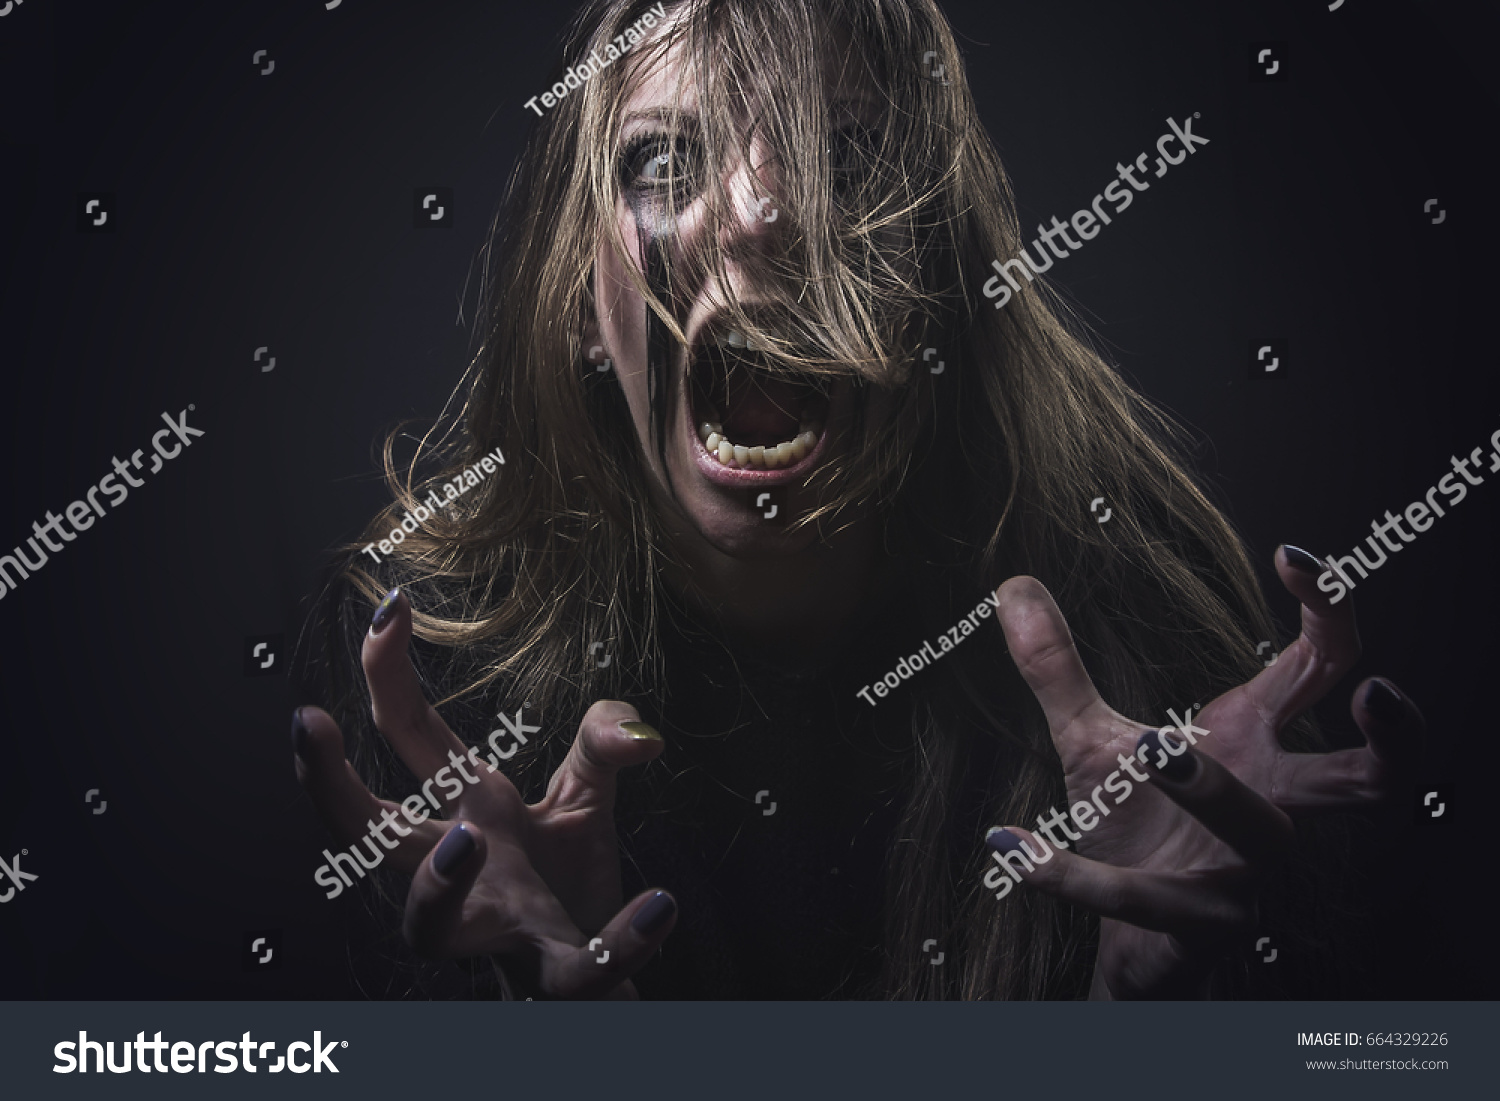 Crazy deranged woman pulling her hair out, scary and insane, halloween concept, possessed by evil spirits #664329226